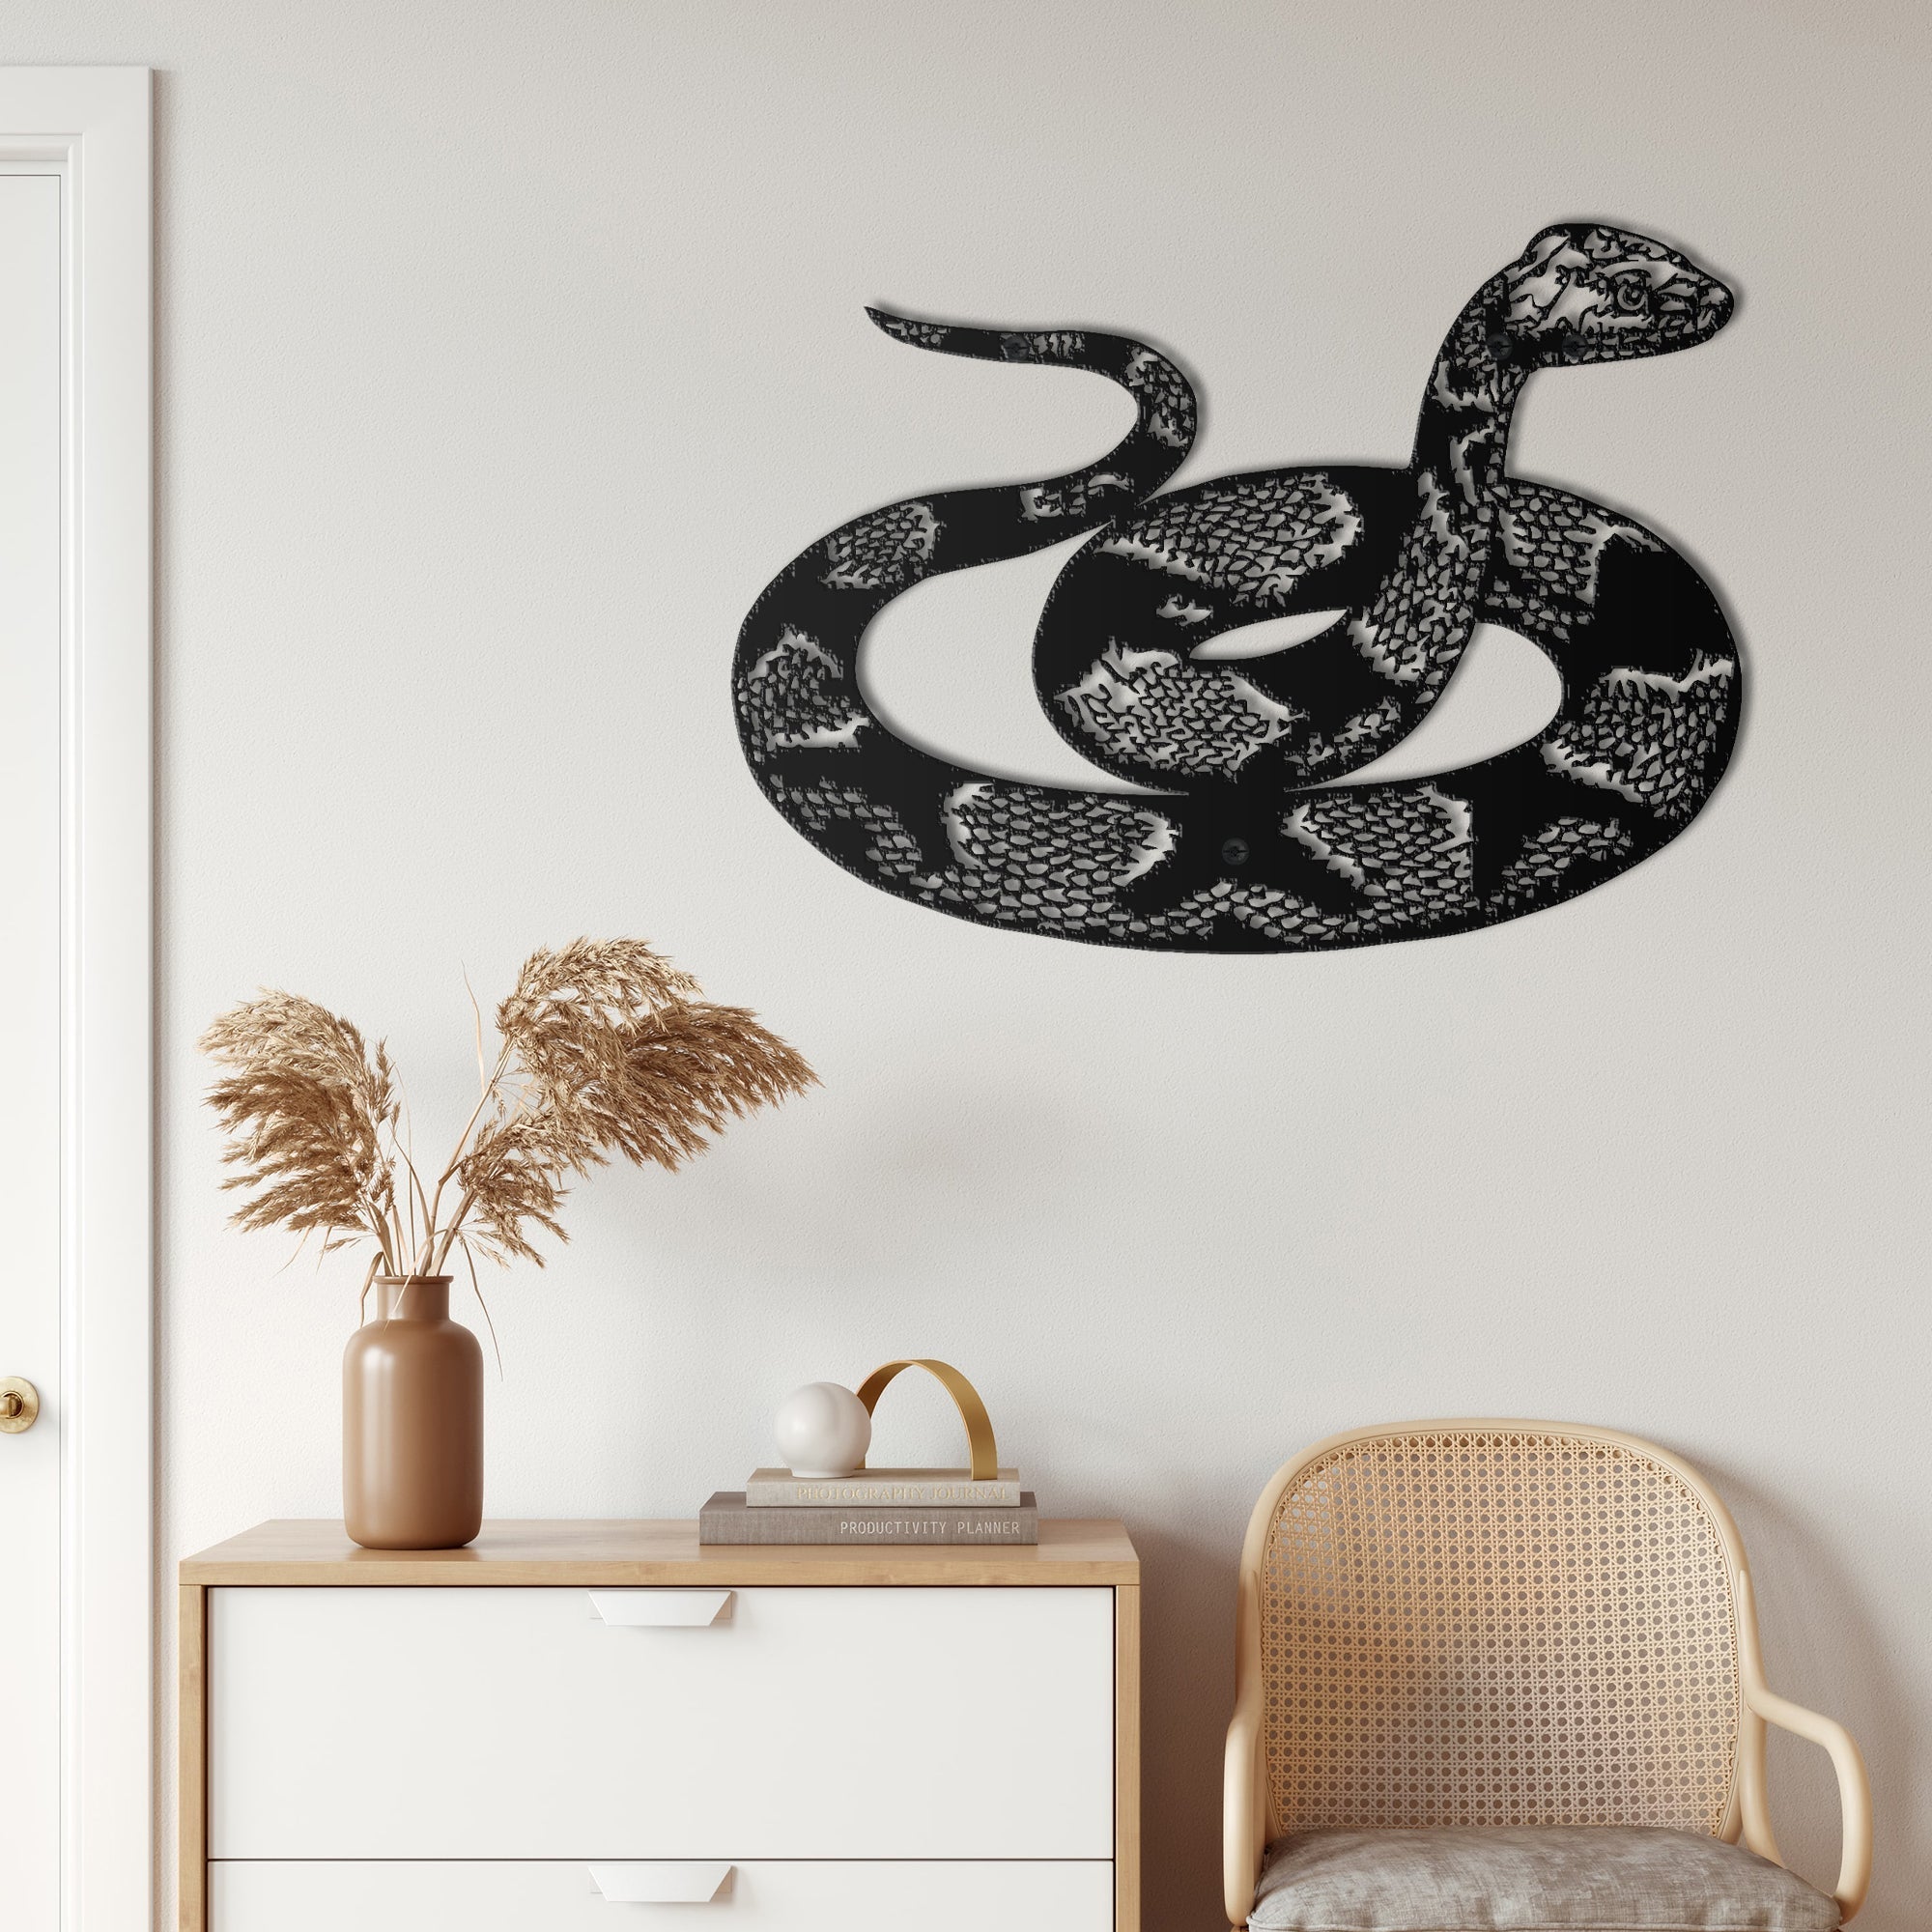 Snake Metal Wall Decor Comes In 4 Sizes